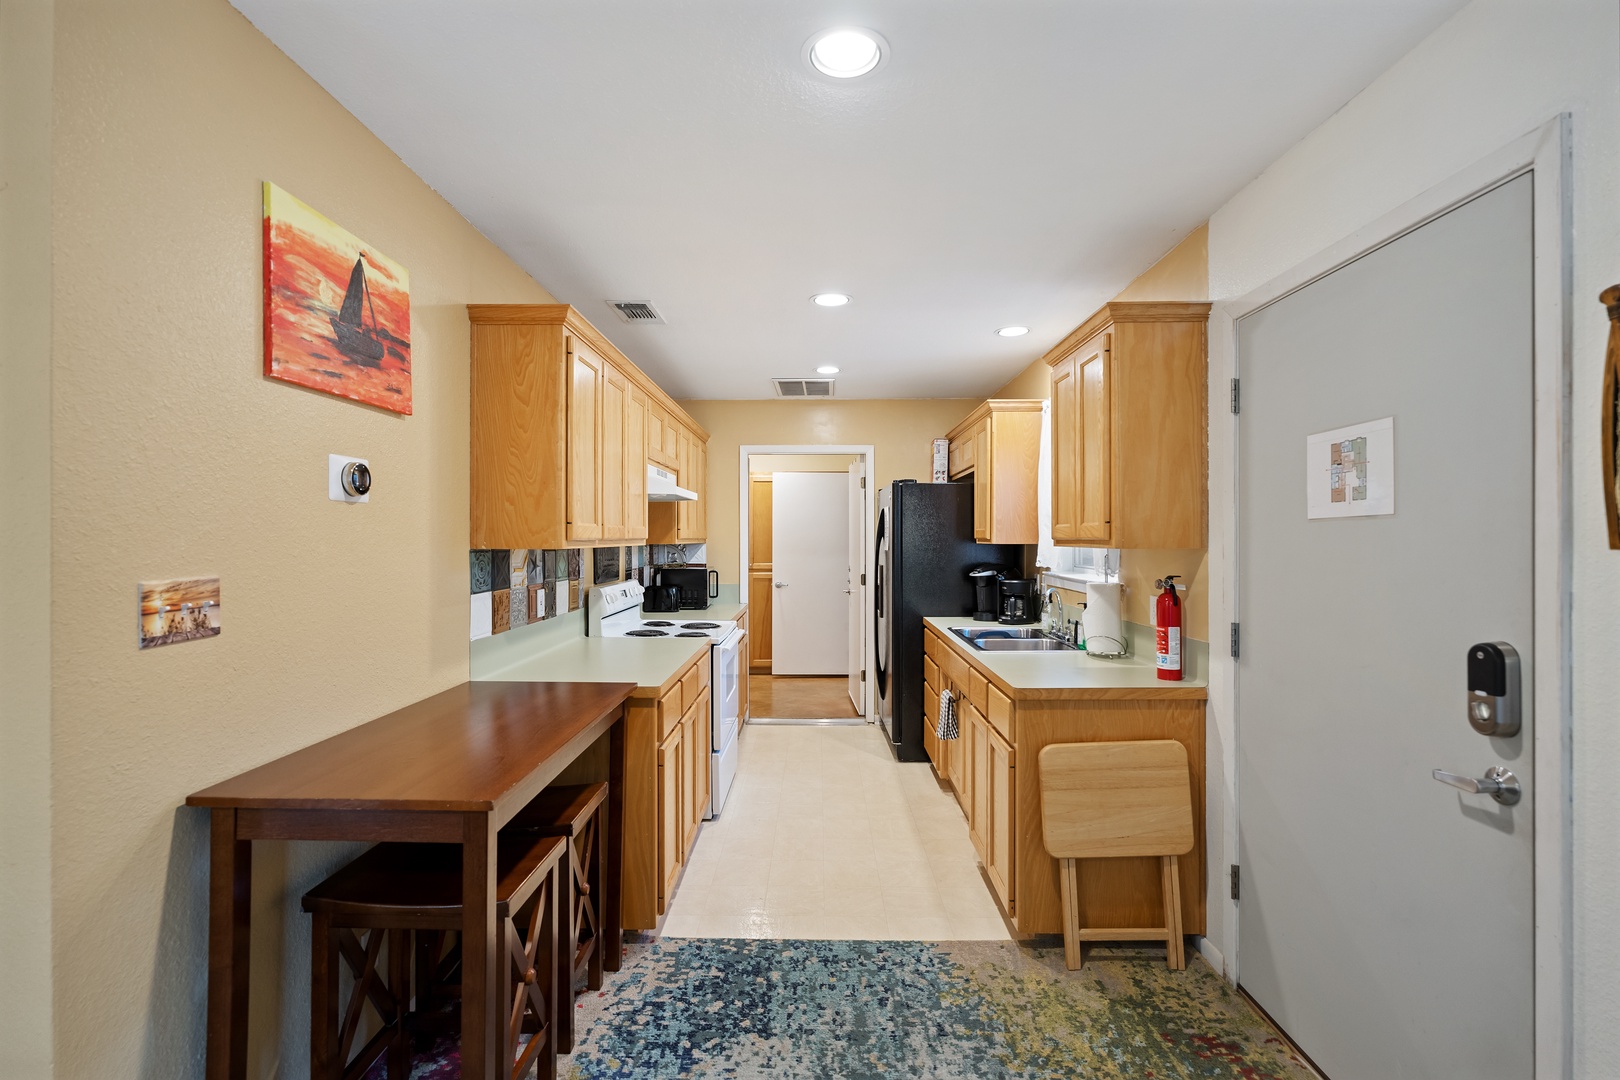 Guests staying in the casita will enjoy privacy and a separate kitchen